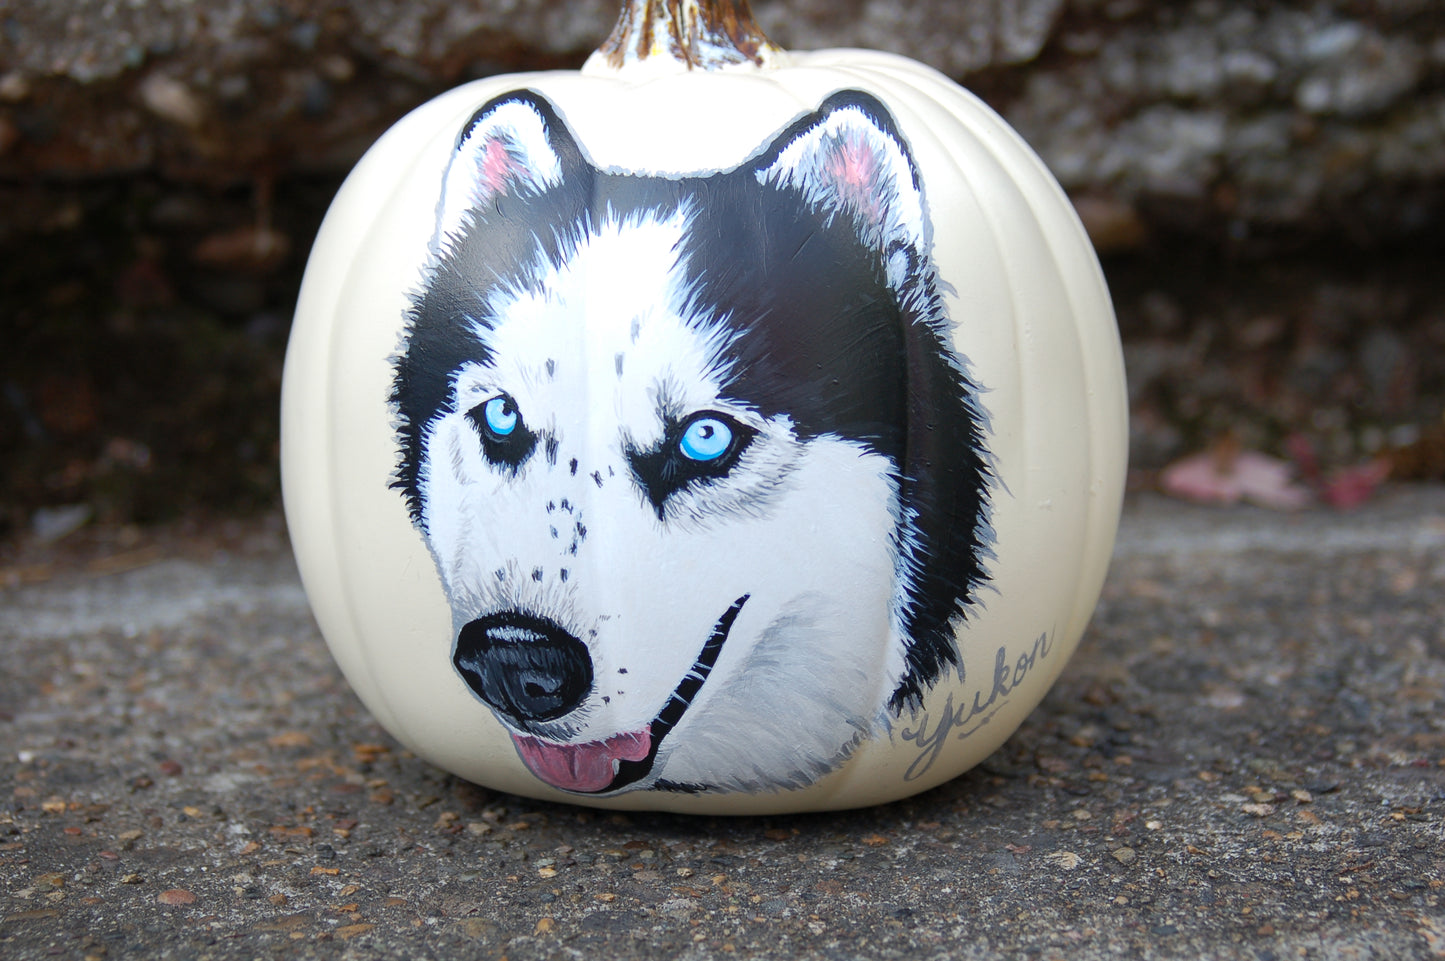 Hand-Painted Pumpkins with Your Dog!